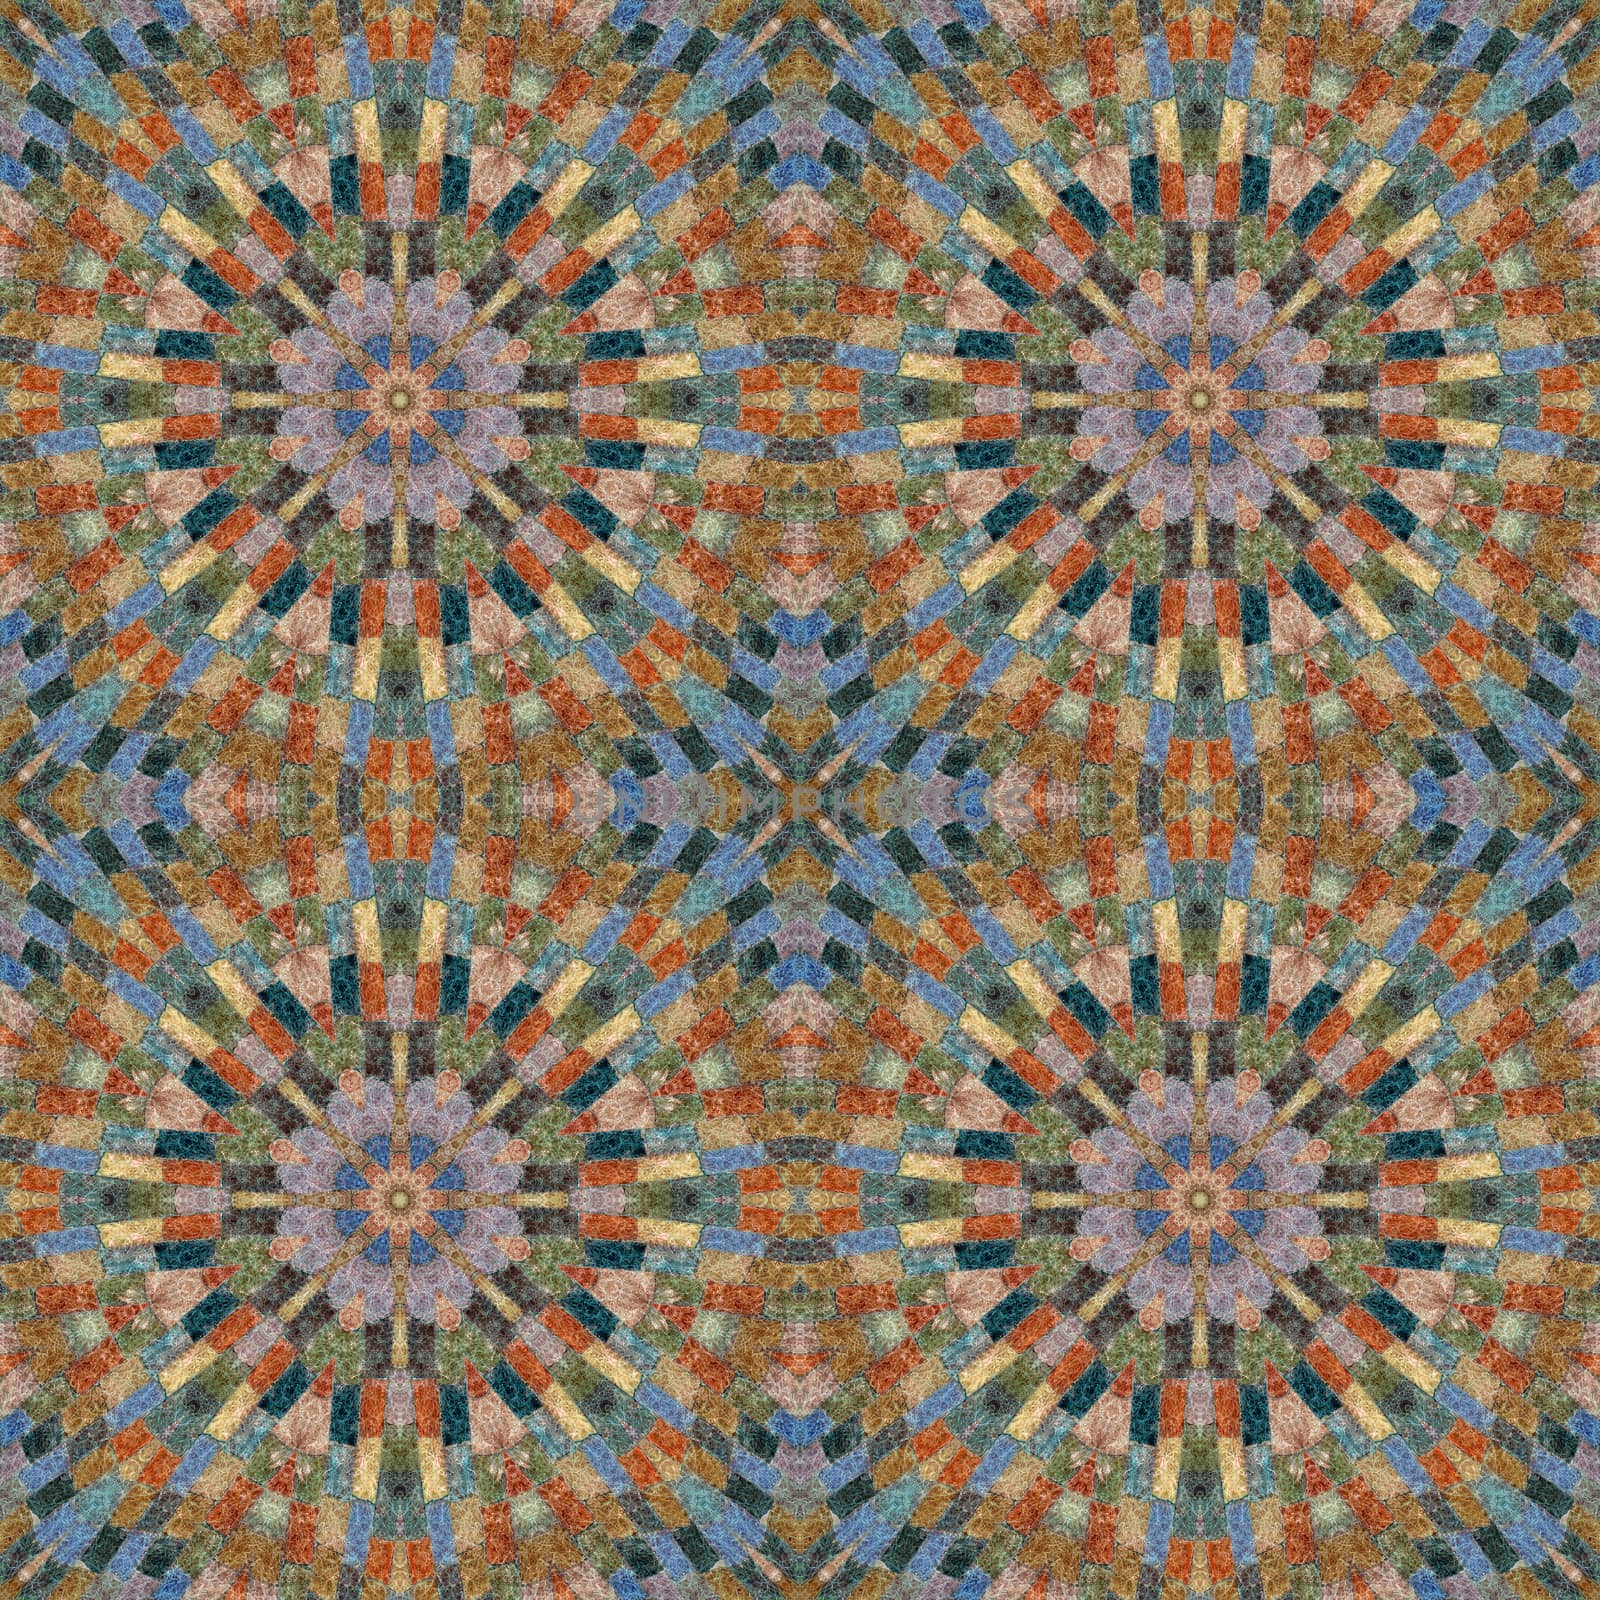 Seamless pattern, mosaic of  fabric by alexcoolok